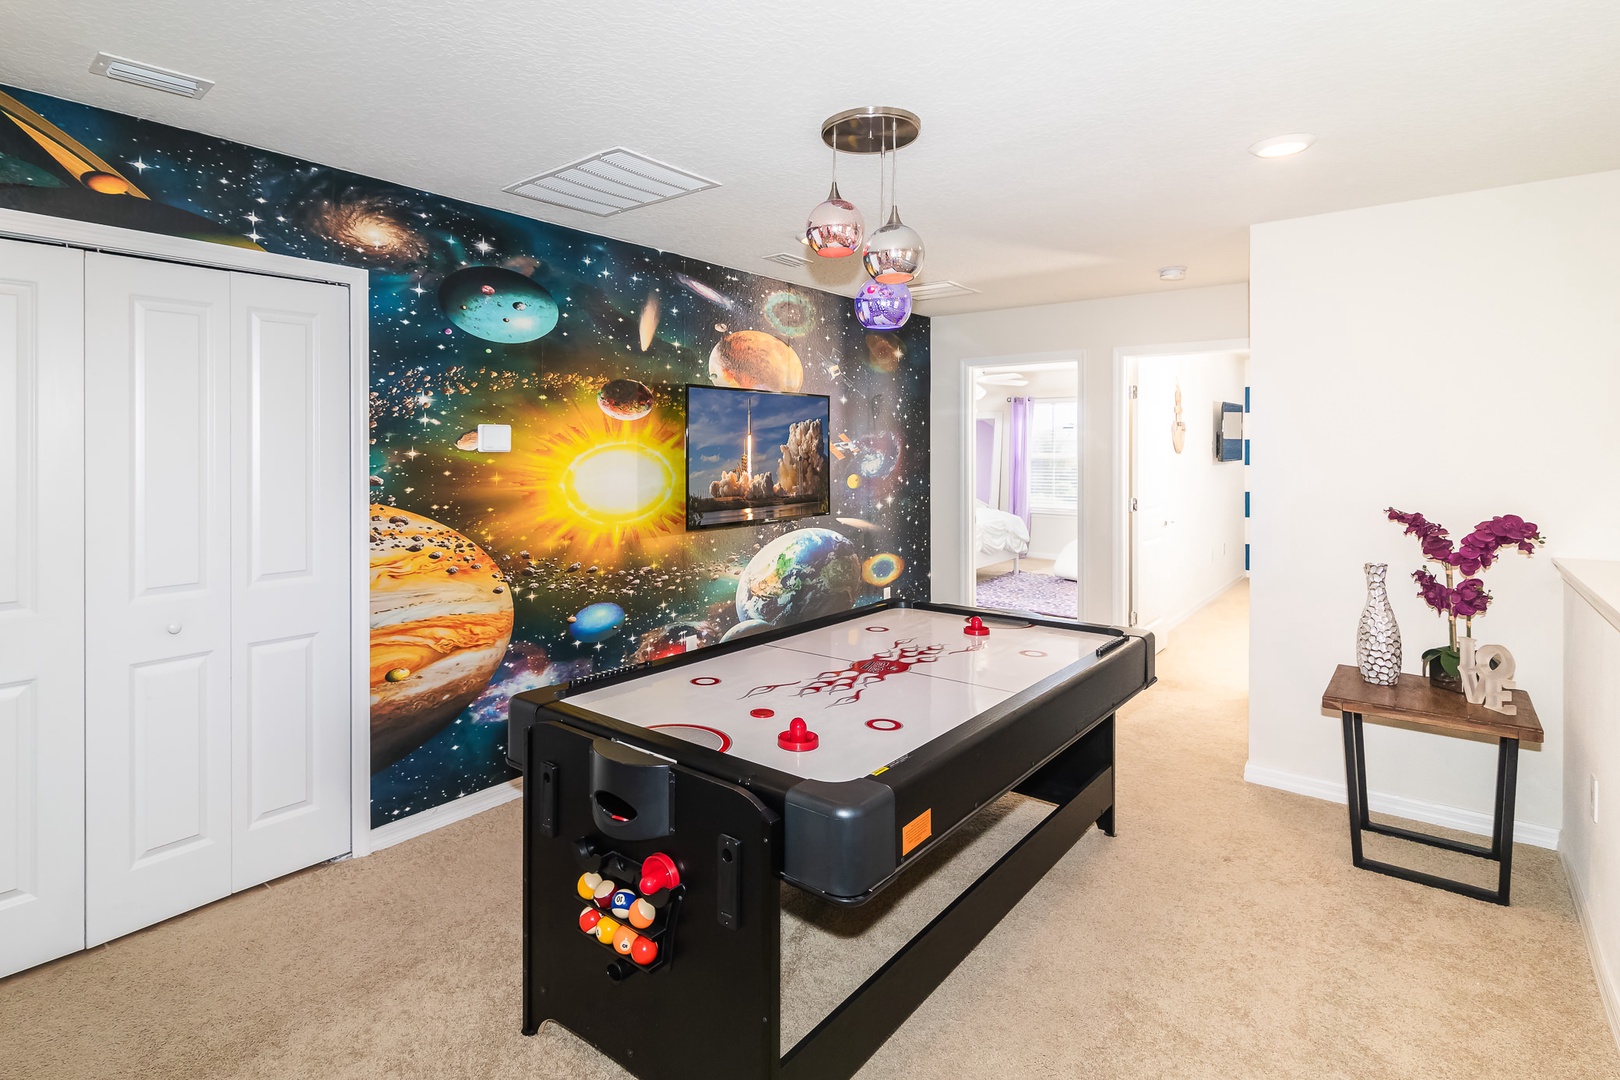 Game room on 2nd floor landing with air hockey table and TV